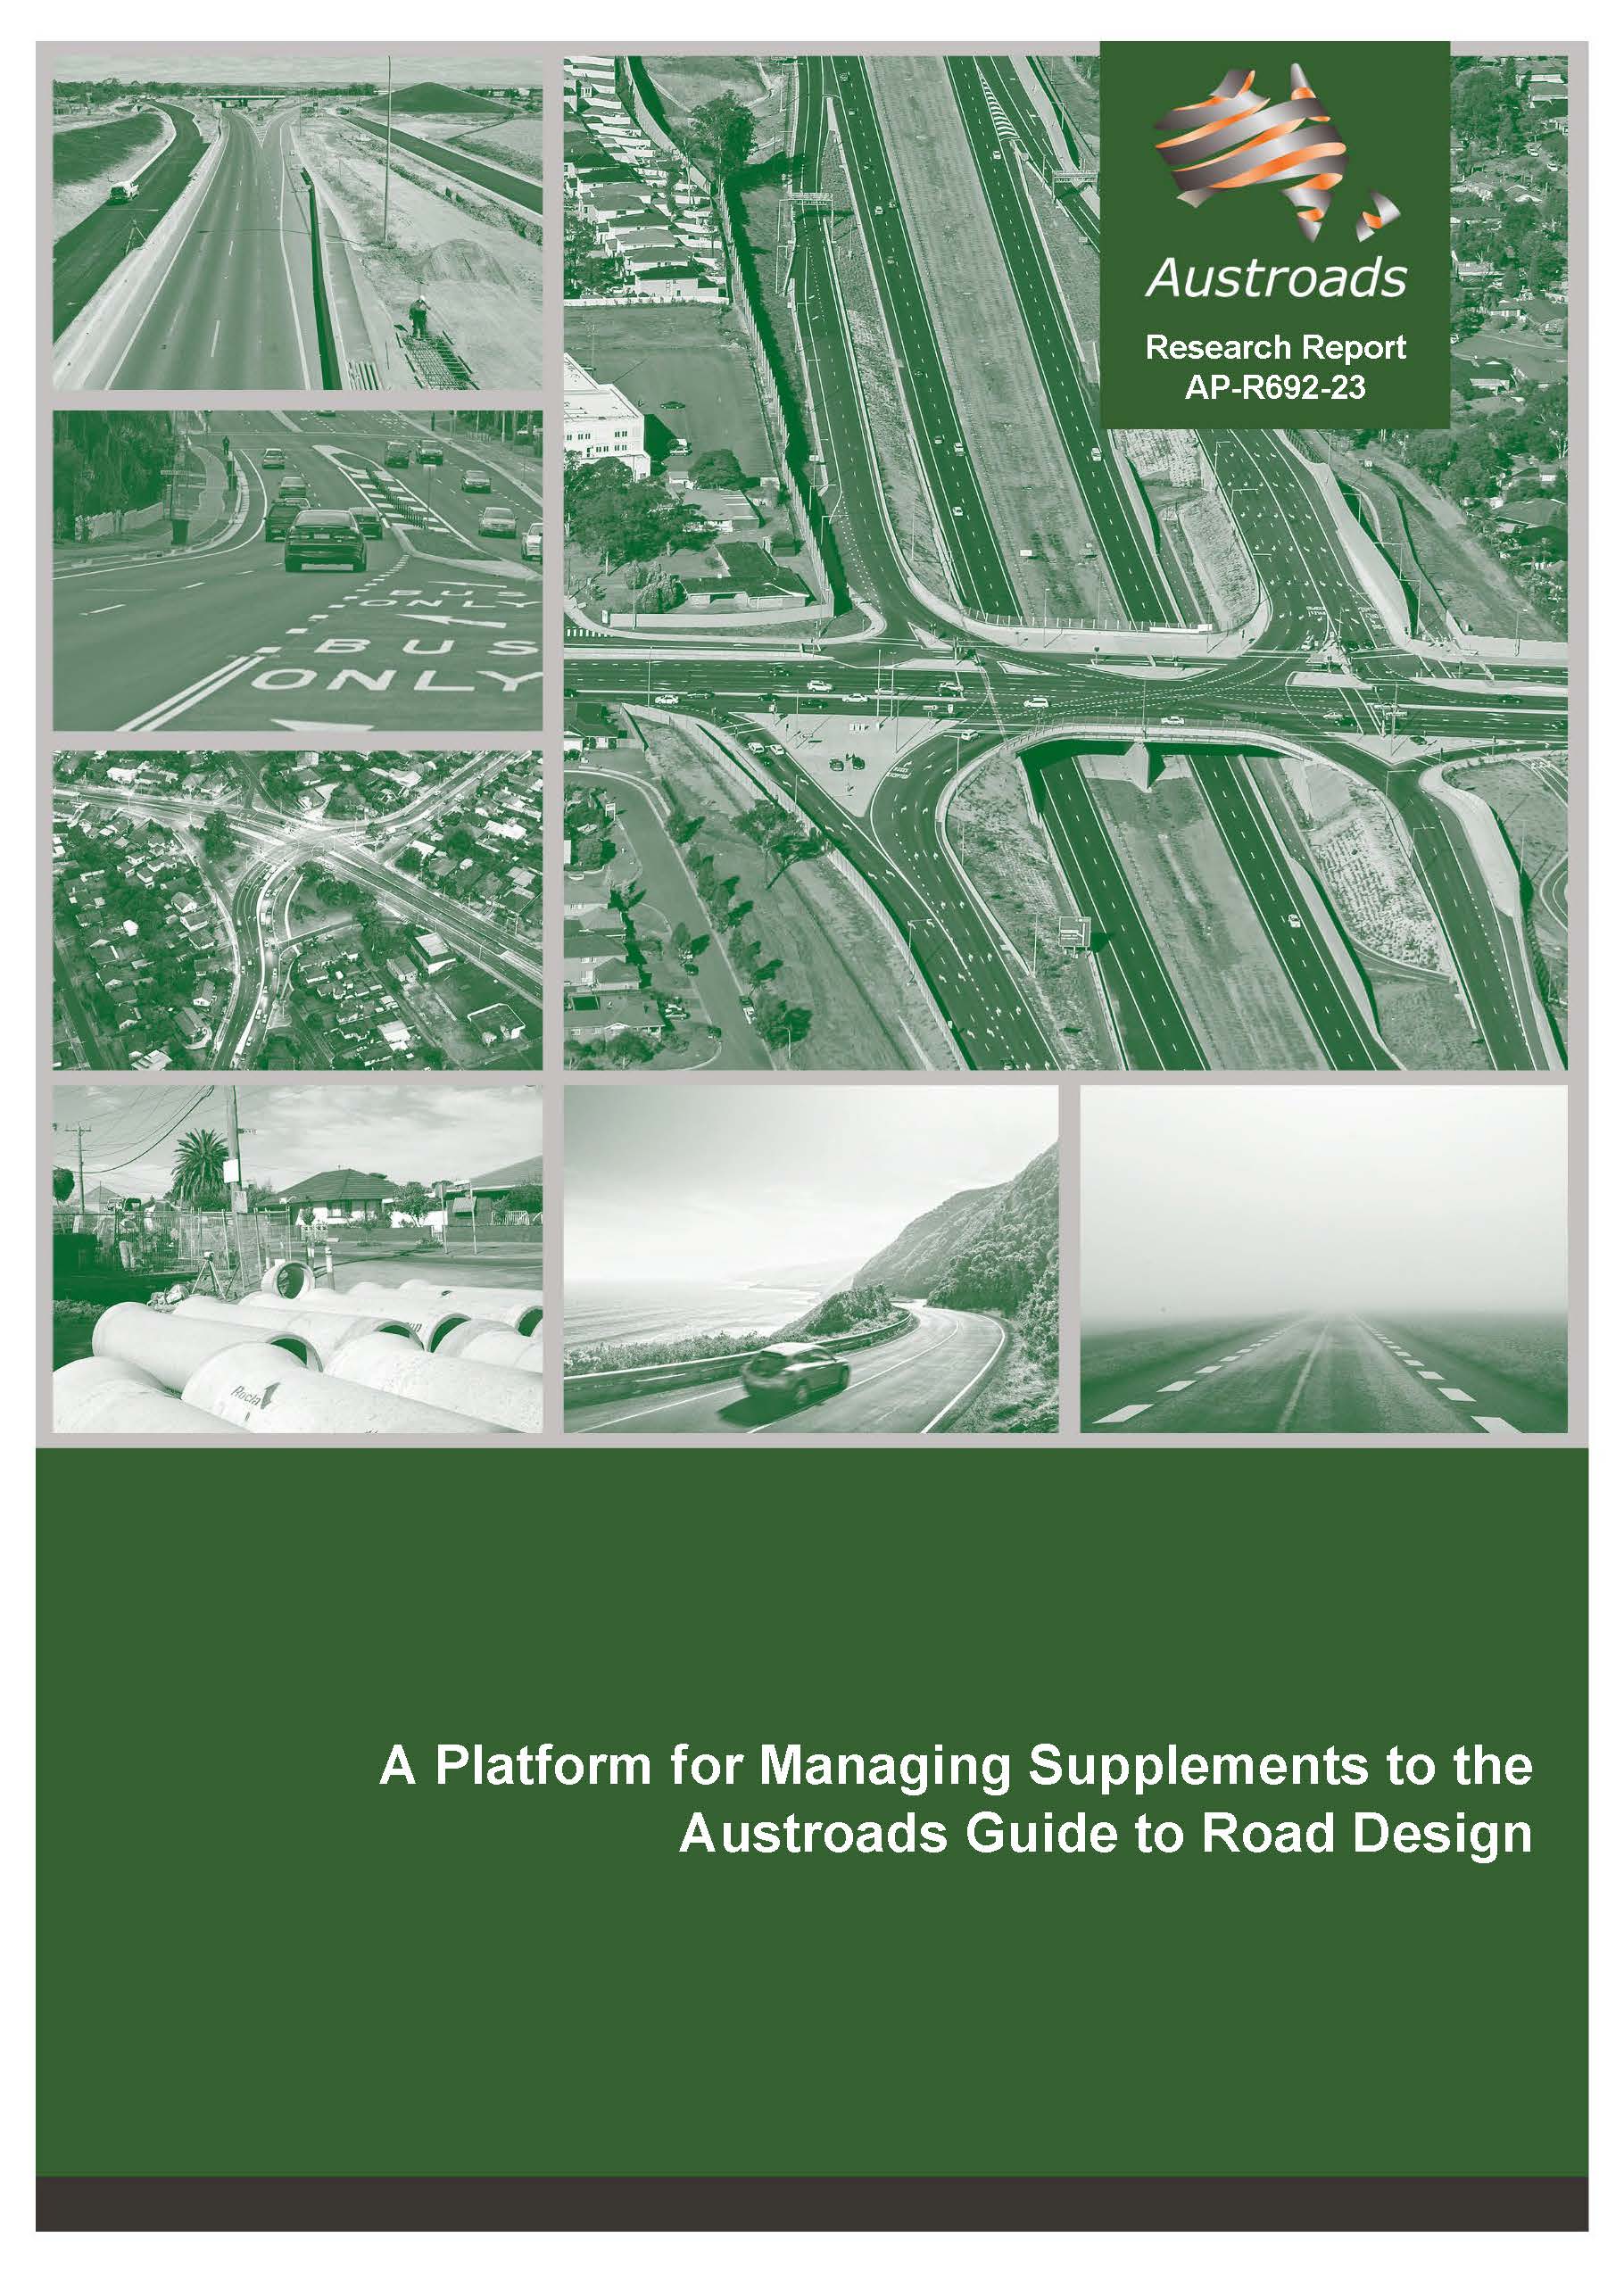 A Platform for Managing Supplements to the Austroads Guide to Road Design